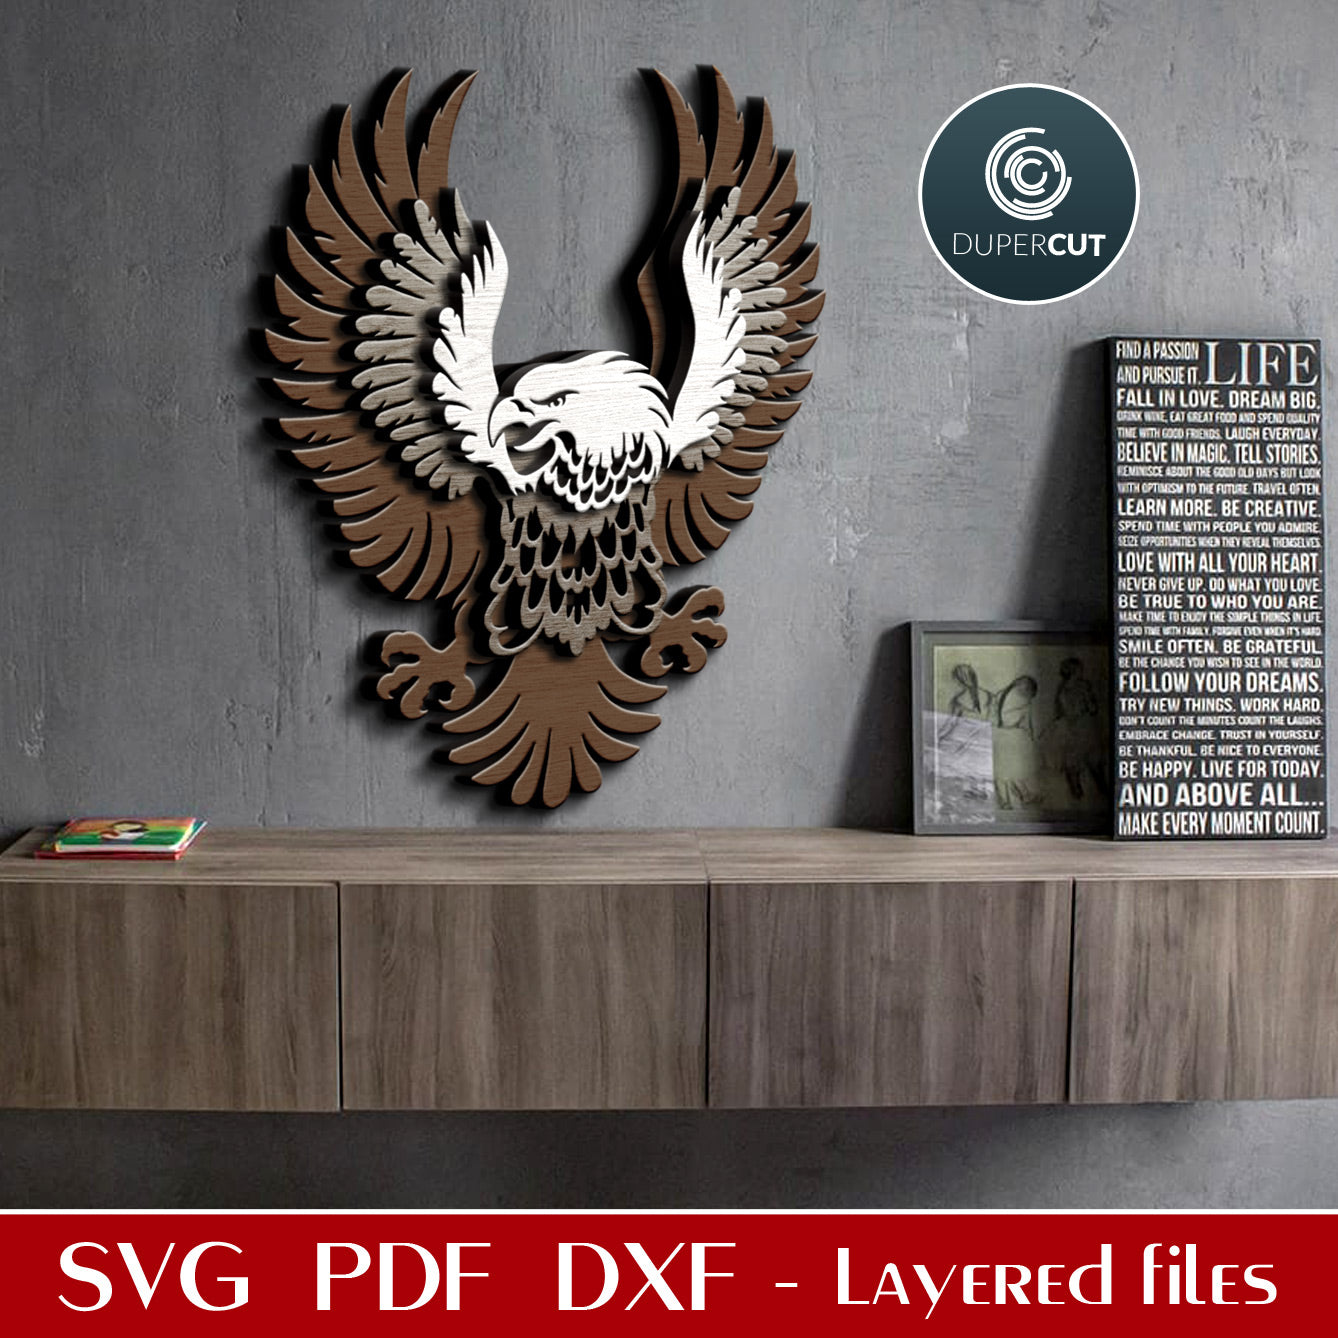 Eagle wall decoration pattern - SVG DXF layered vector cutting files for Glowforge, Cricut, Silhouette Cameo, CNC plasma machines by DuperCut.com